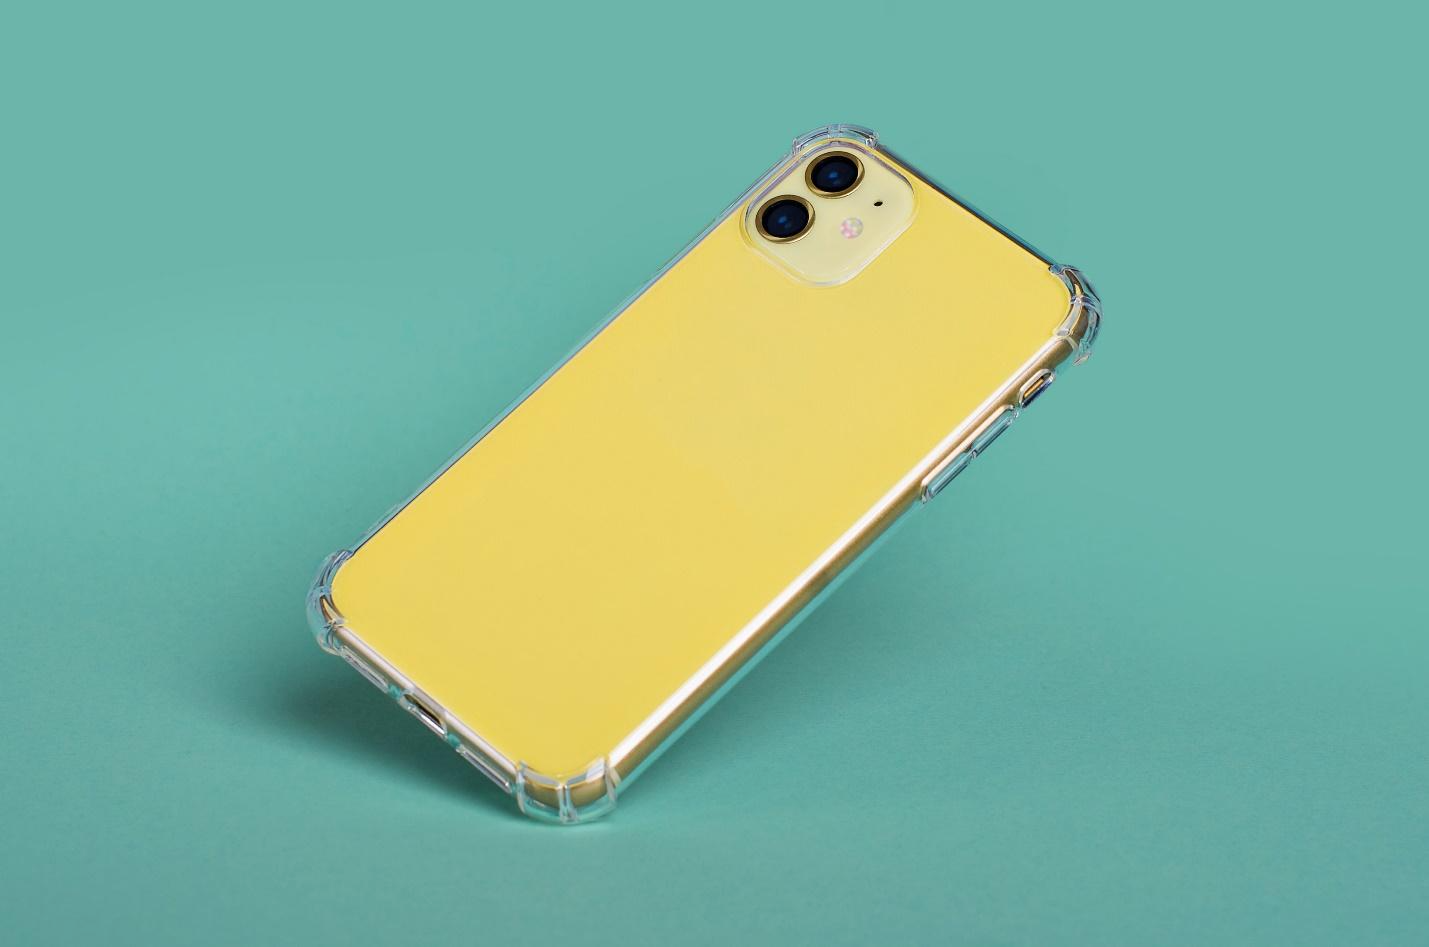 A yellow phone case on a blue background

Description automatically generated with low confidence